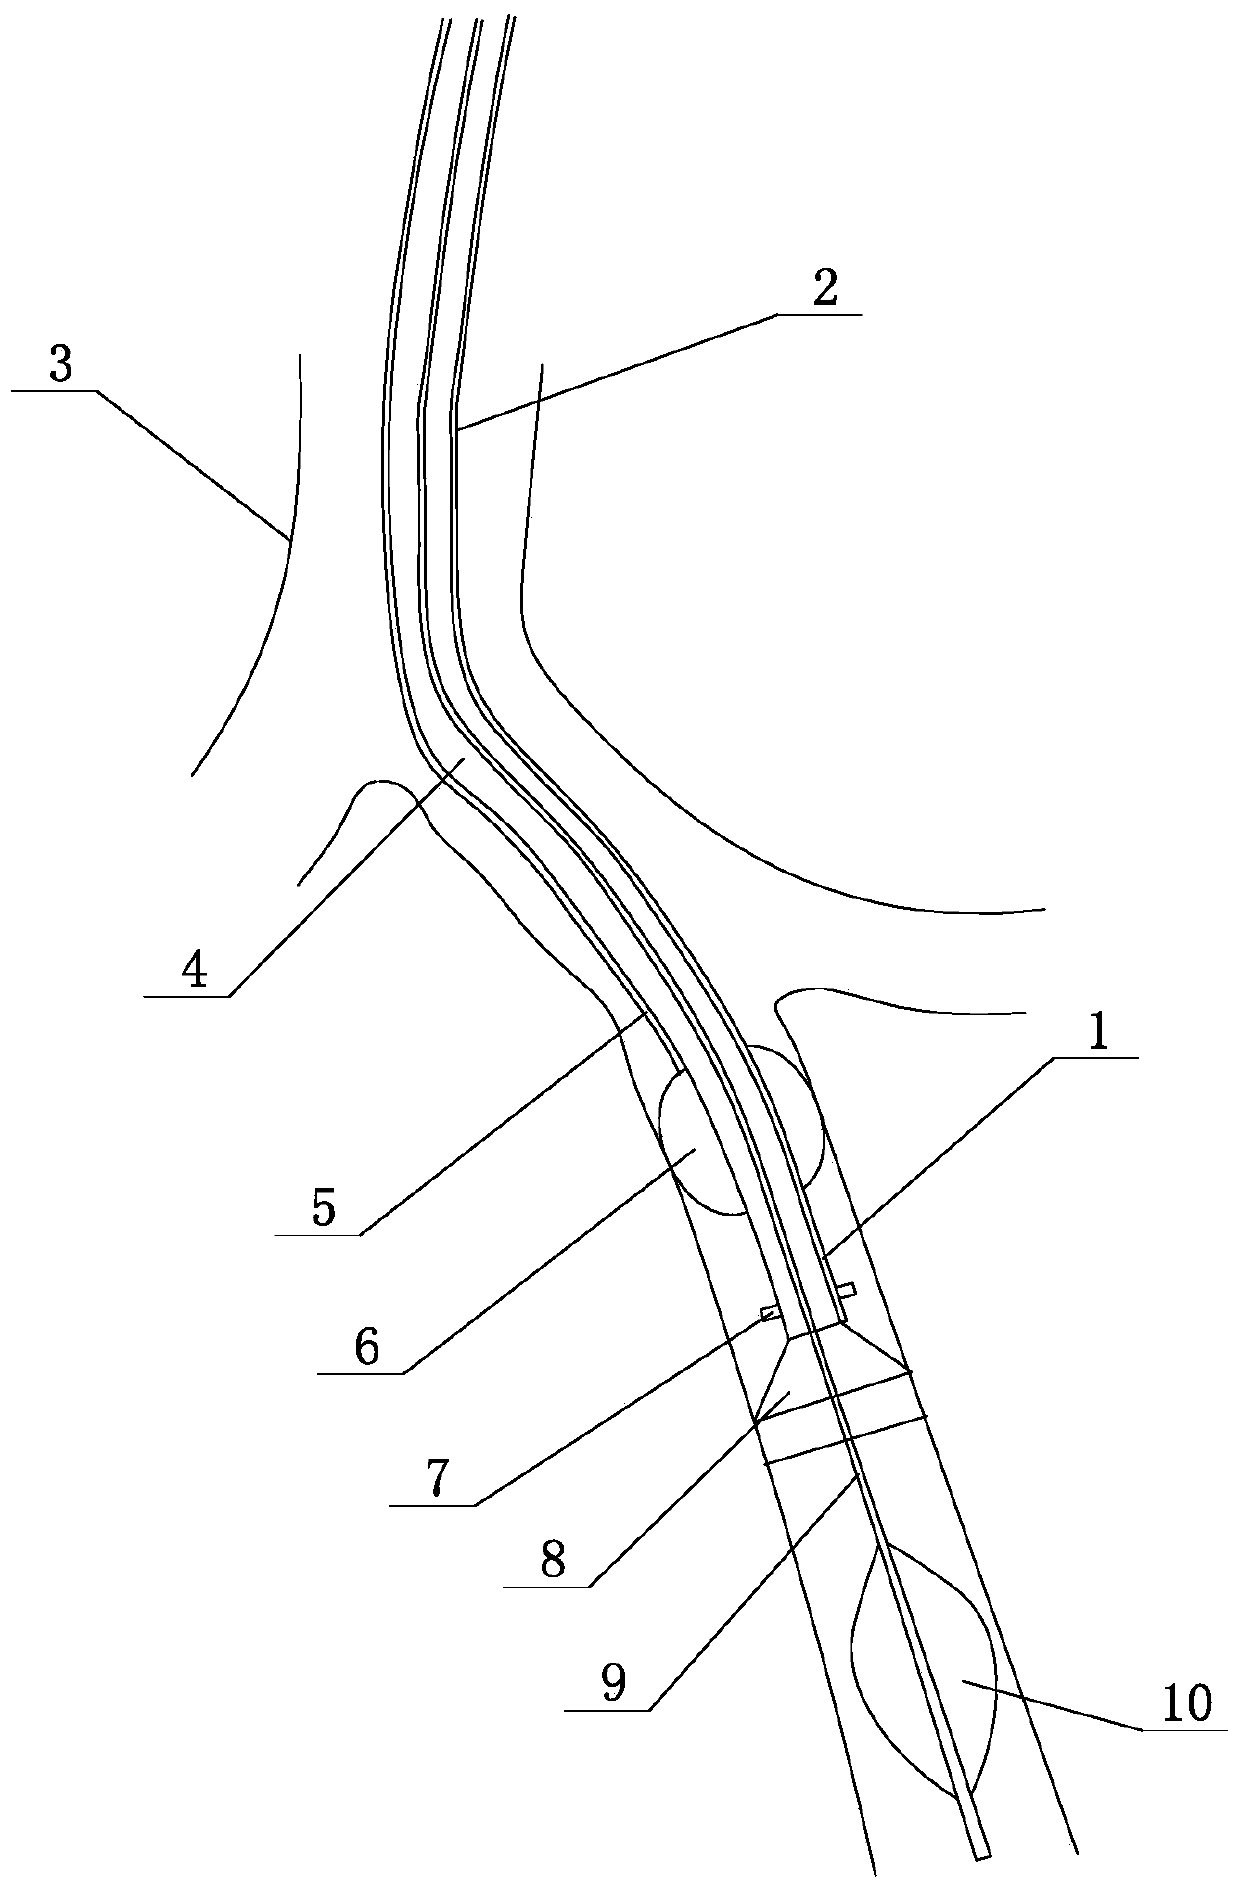 Visual high- selectivity closed bronchus comprehensive treatment device